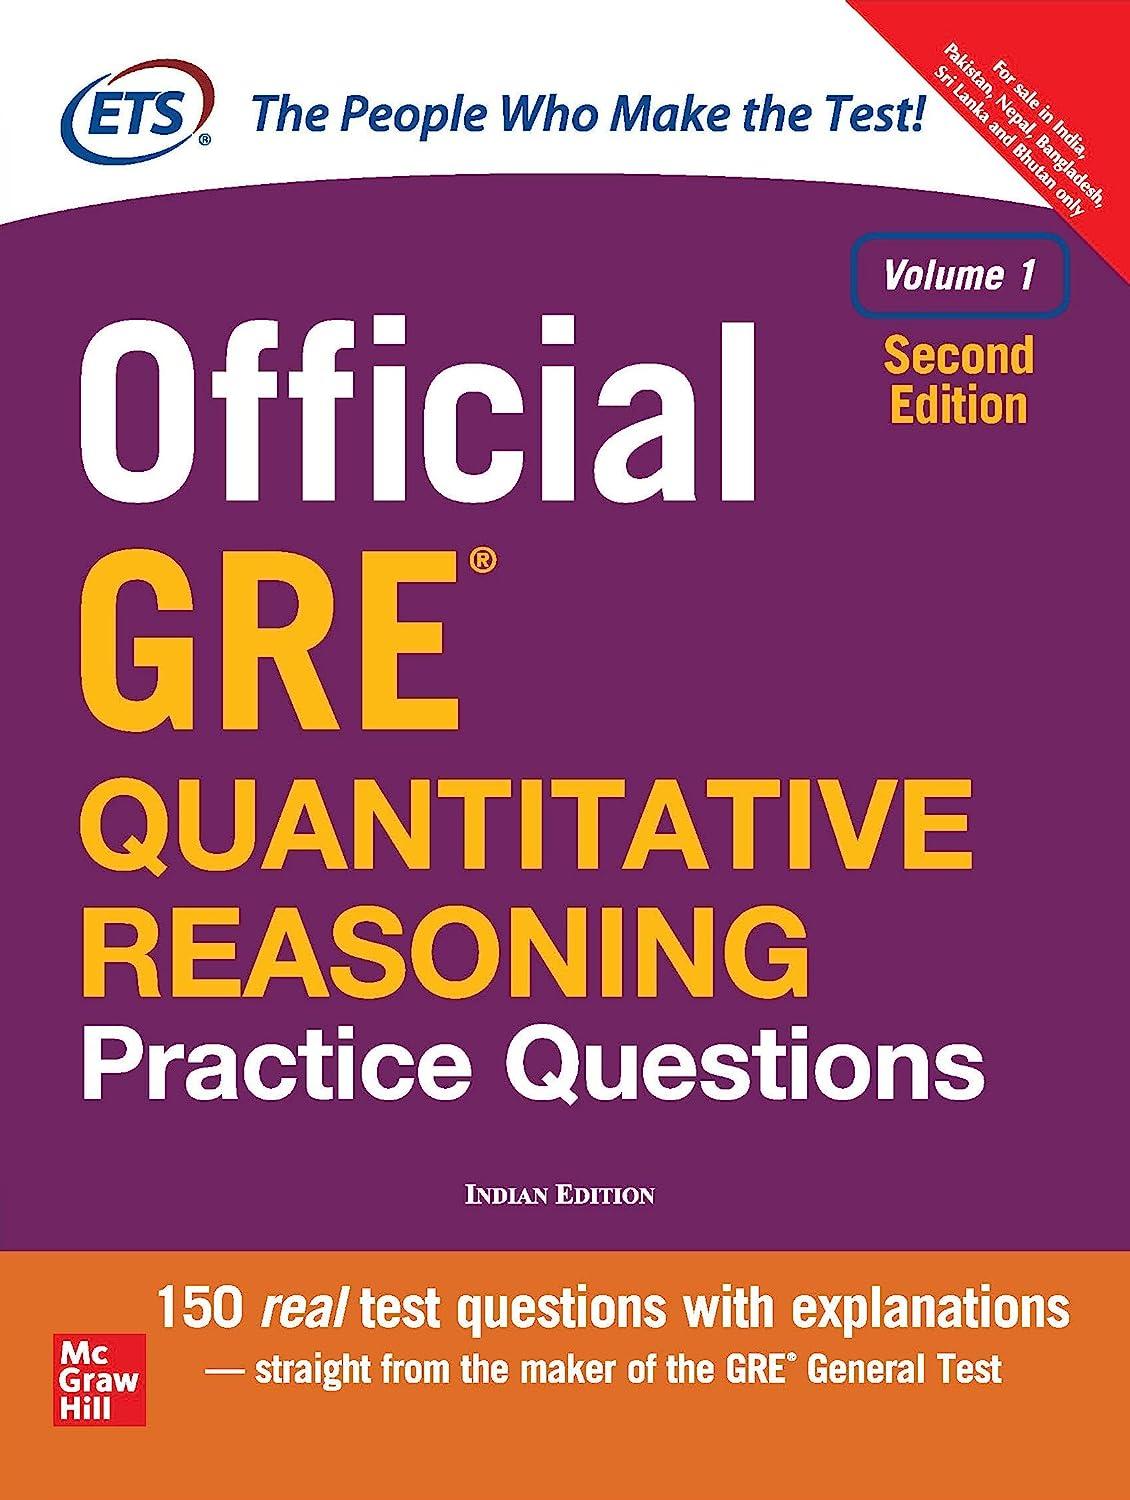 Official GRE Quantitative Reasoning Practice Questions Volume 1 Indian Edition